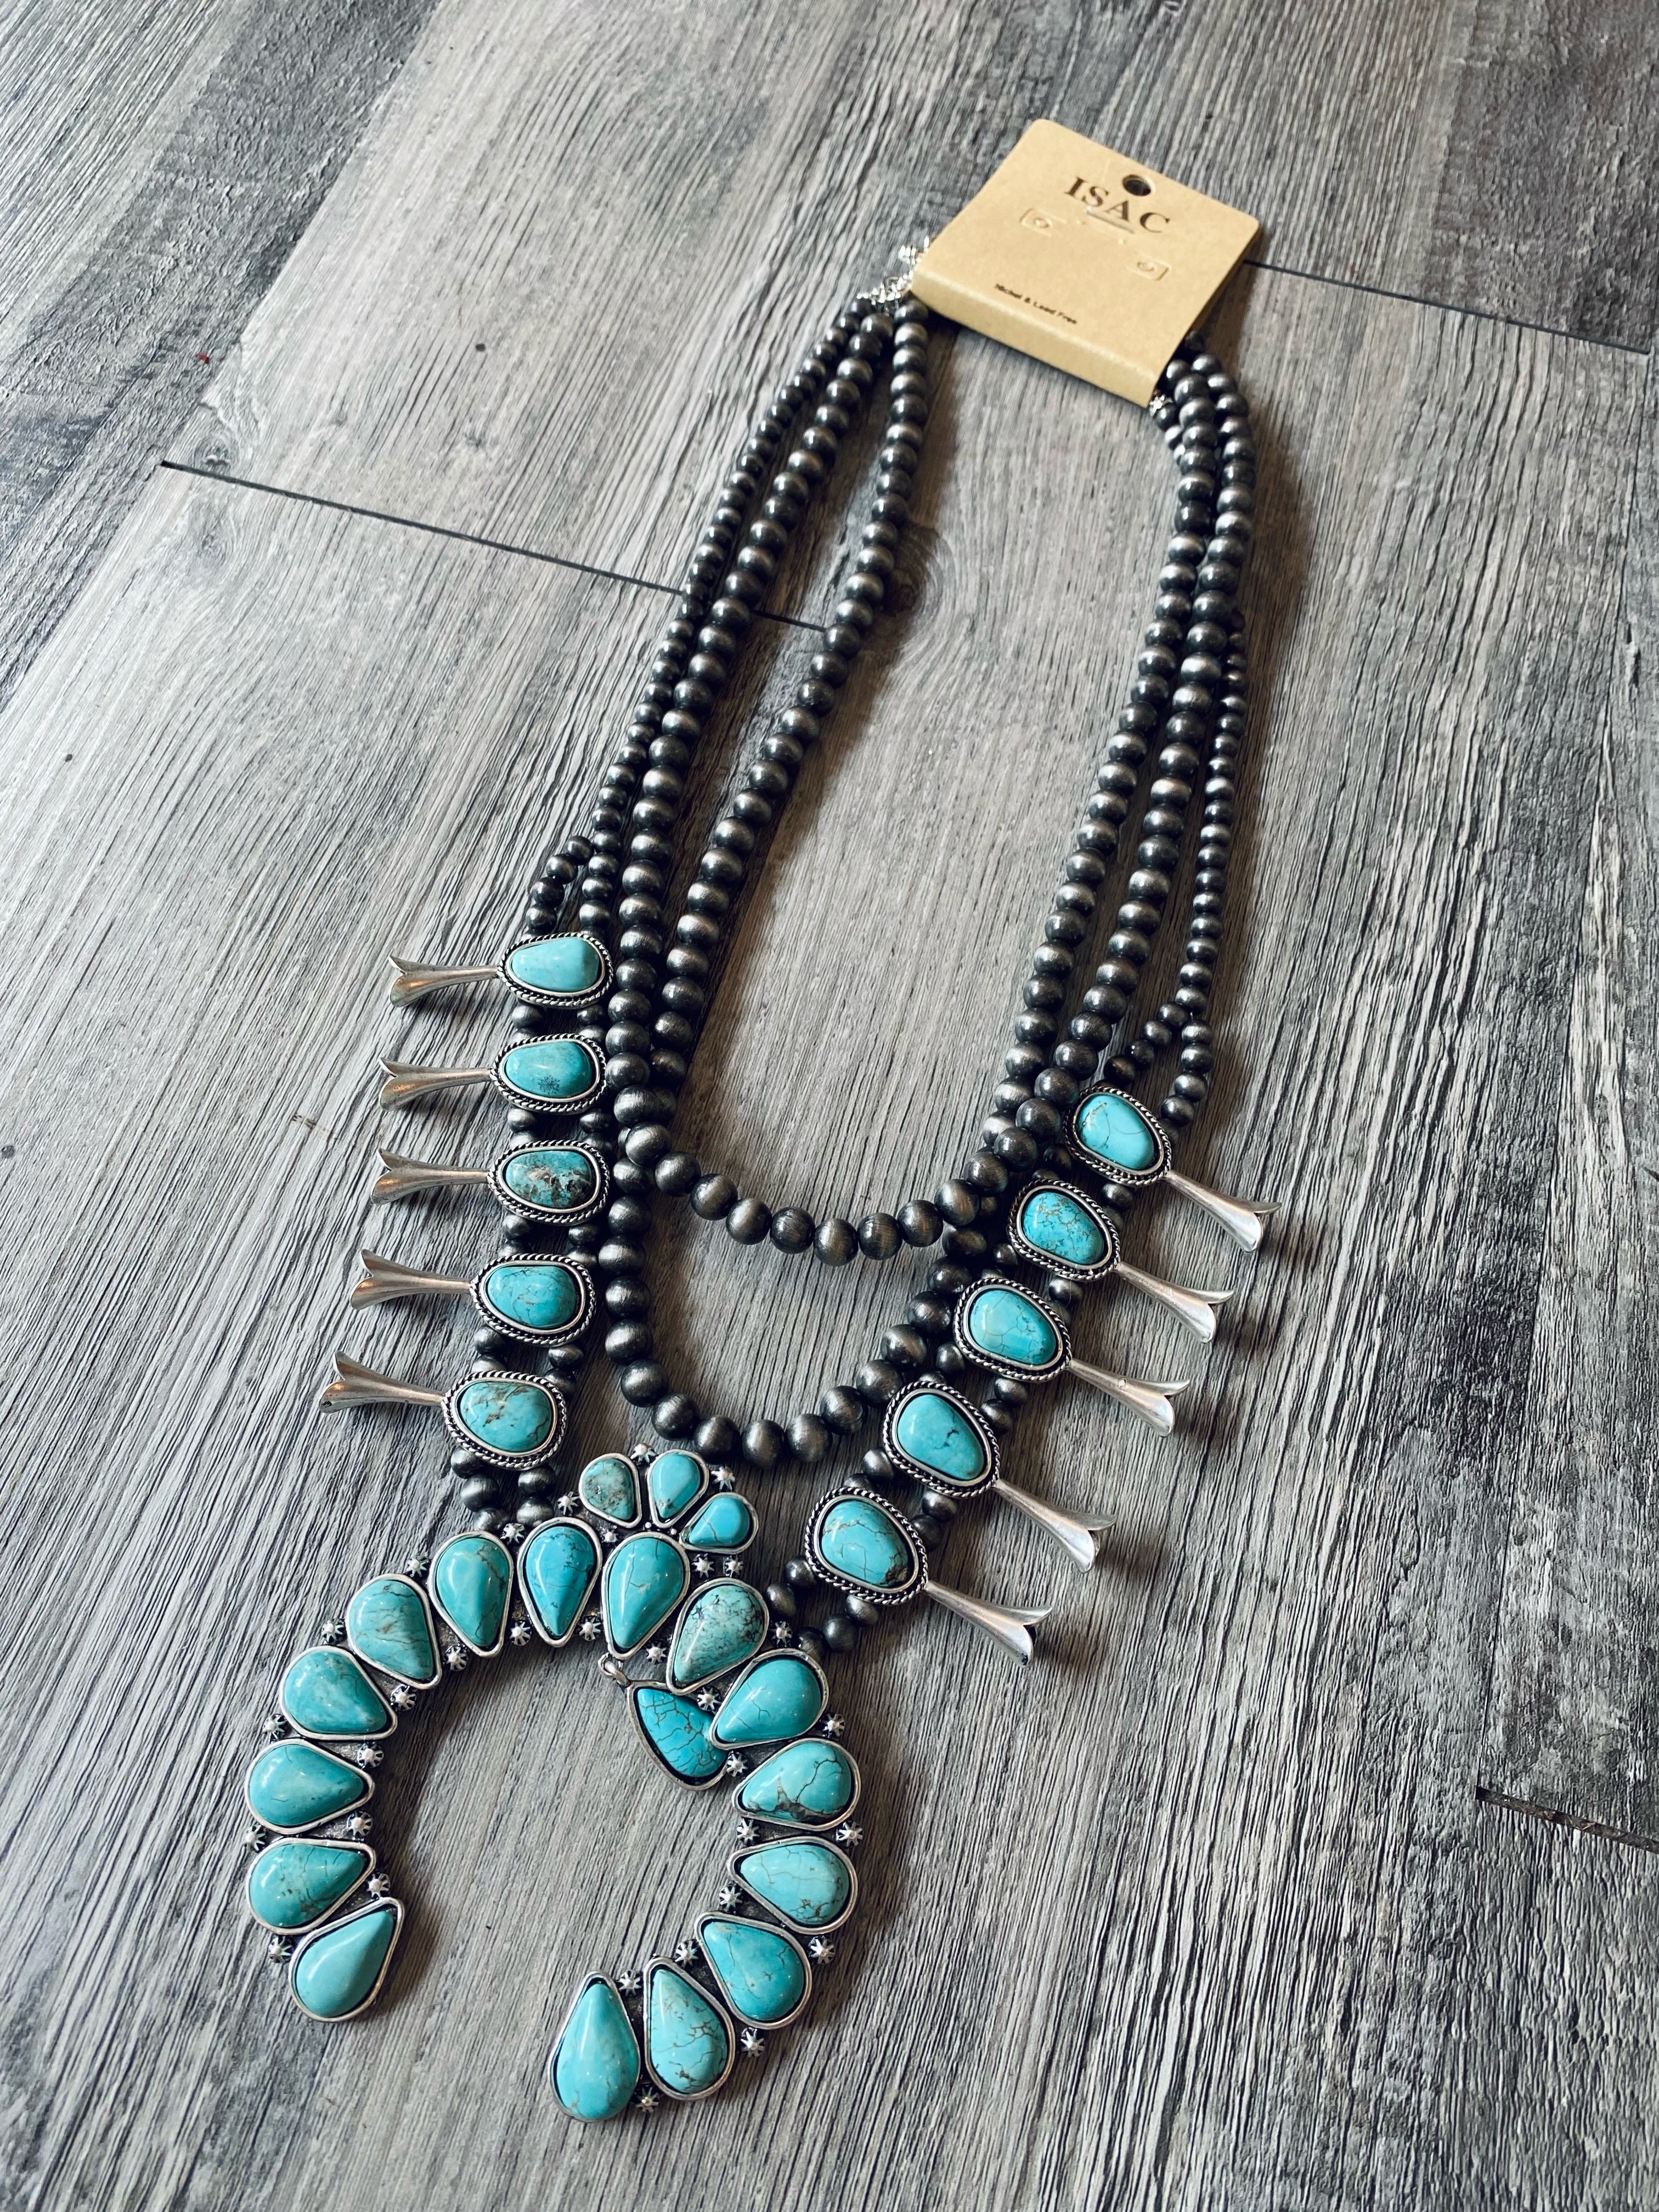 Full Blossom Turquoise Necklace